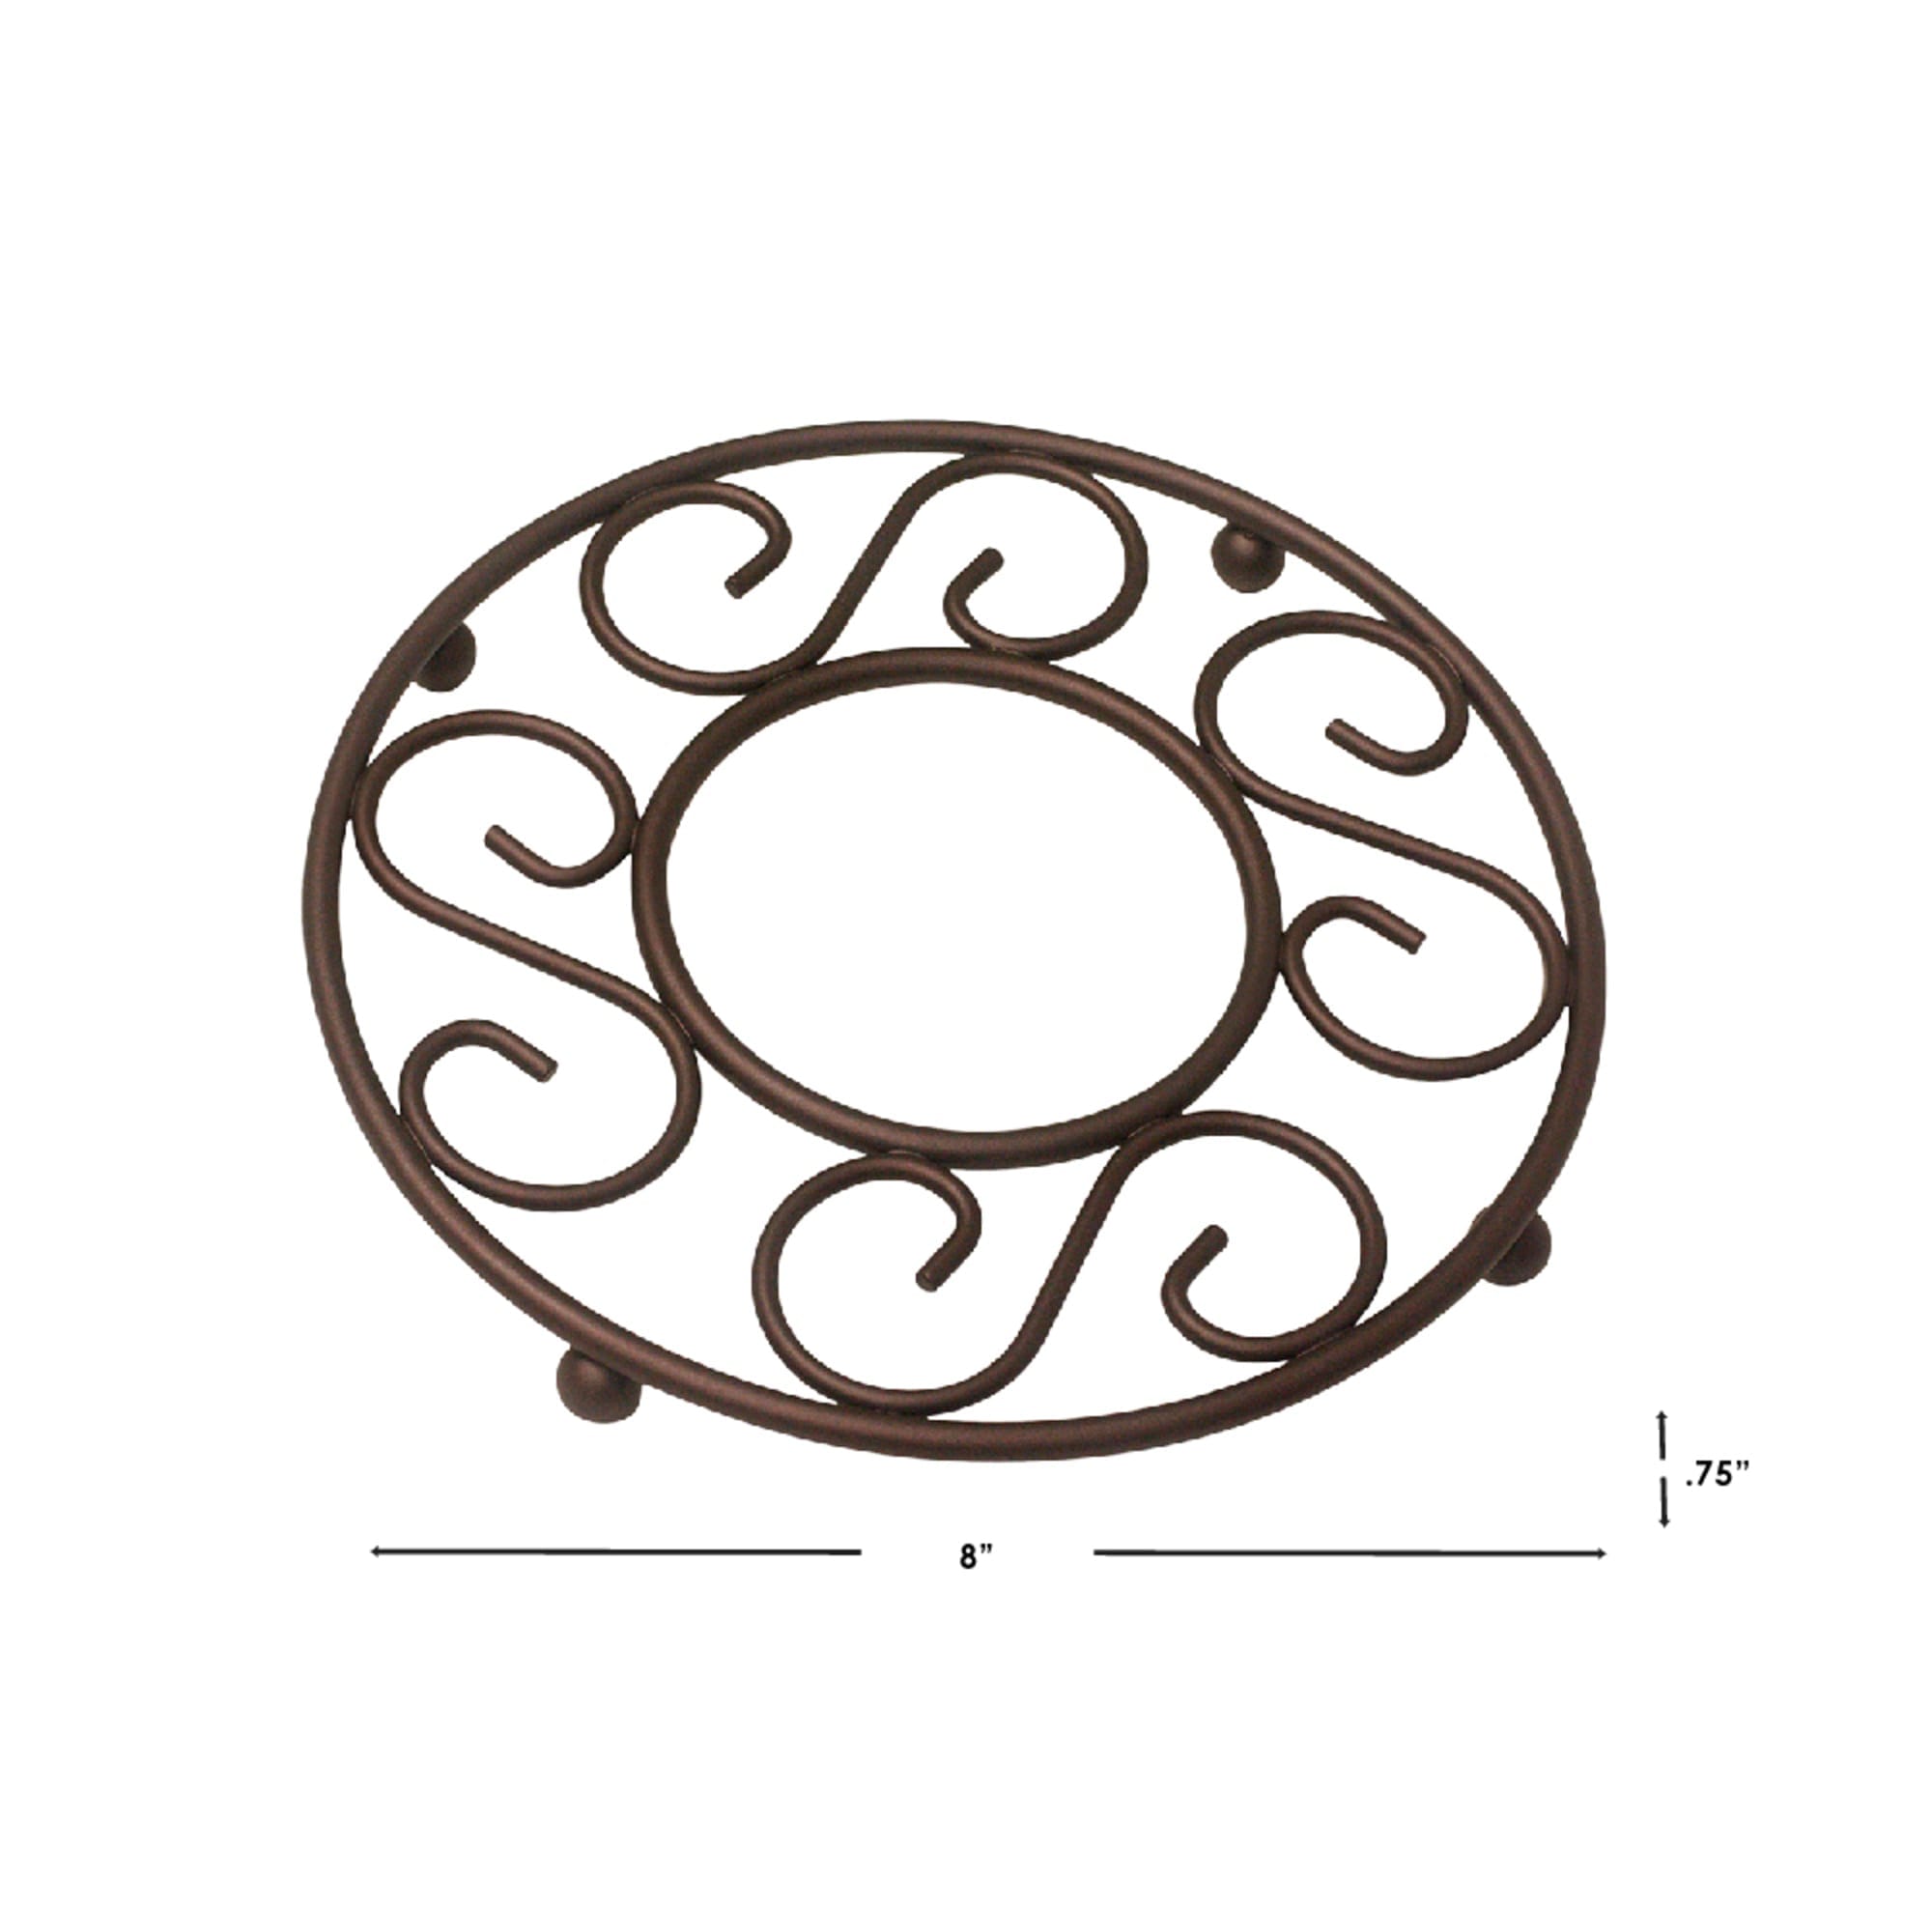 Home Basics Scroll Collection Steel Trivet, Bronze $3.00 EACH, CASE PACK OF 12